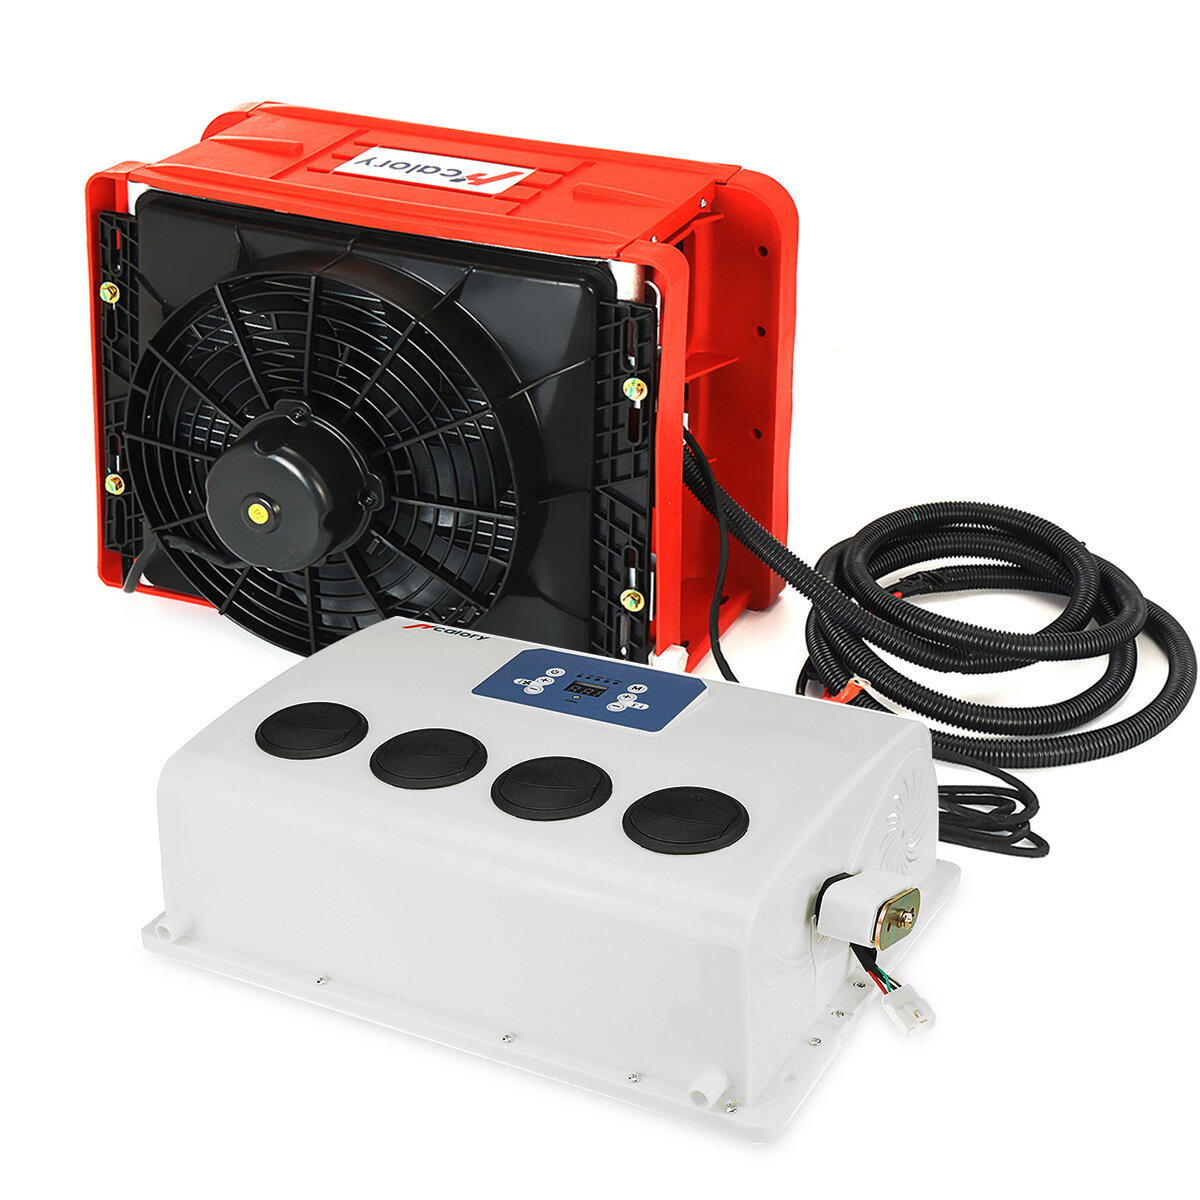 Image of Hcalory 12V/24V Portable Car Air Conditioner Fan Water Refrigeration SplitAir Conditioning Fans